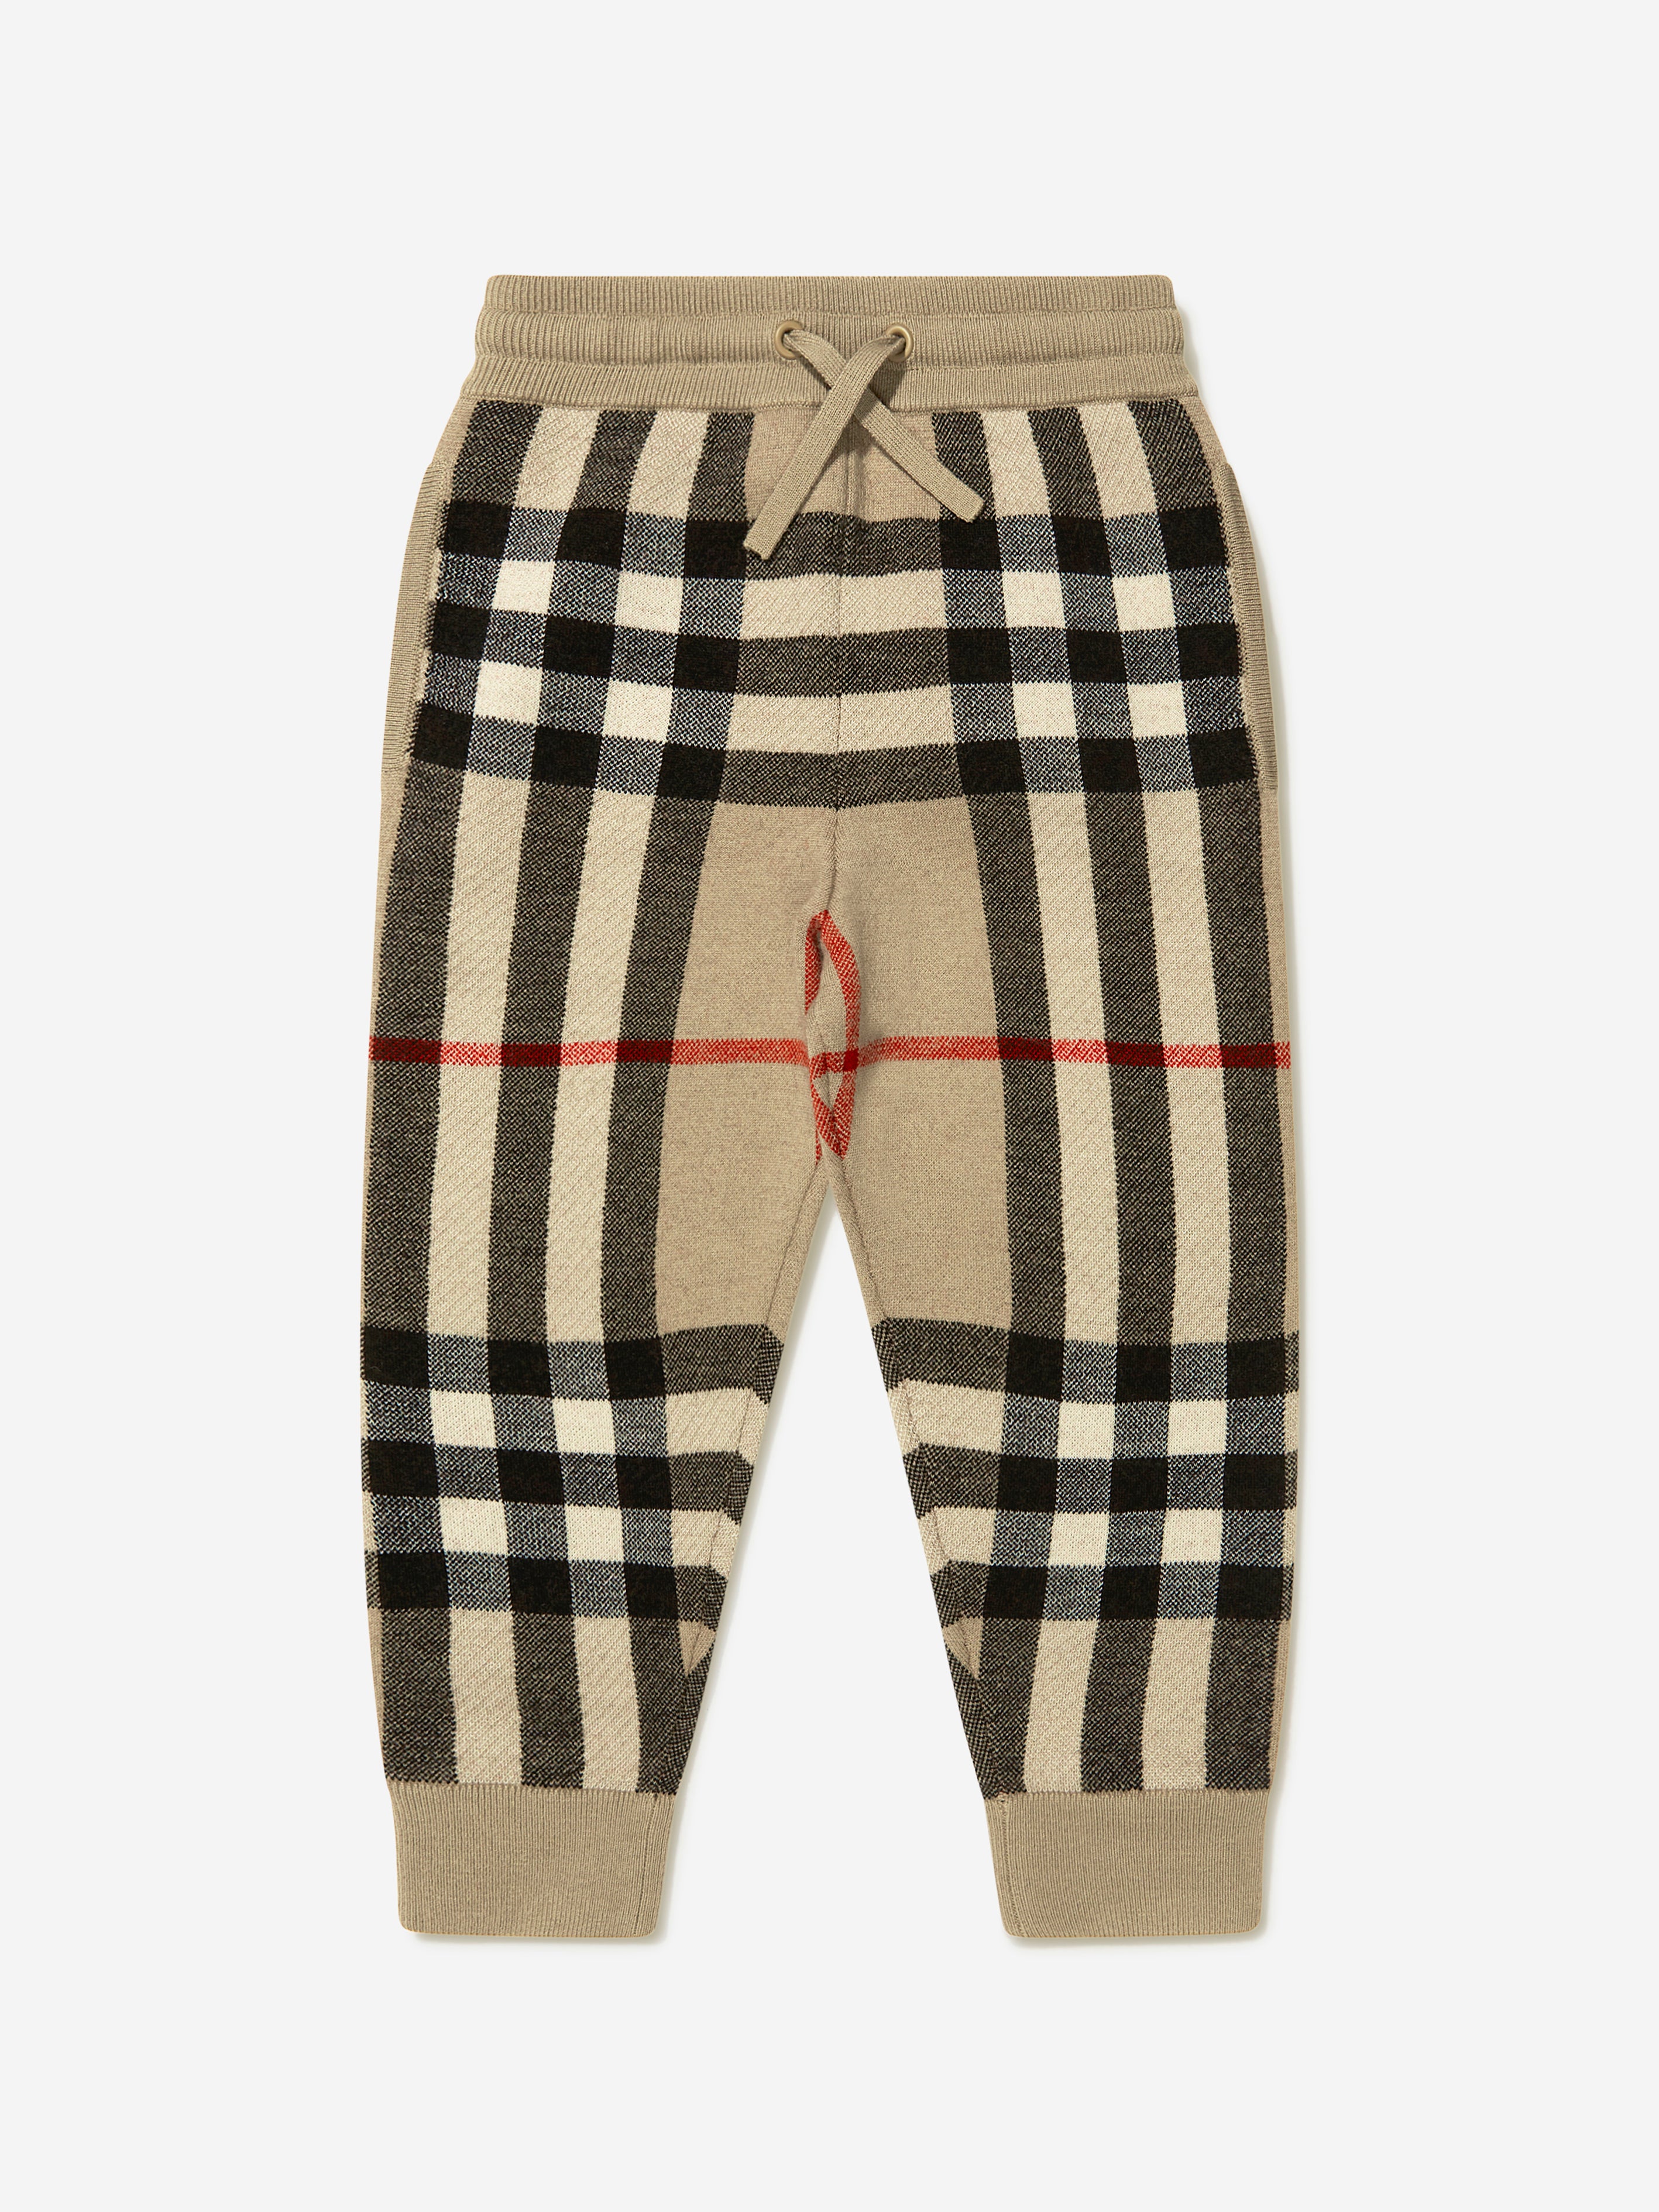 Burberry Kids - Boys Wool And Cashmere Gerard Joggers | Childsplay Clothing